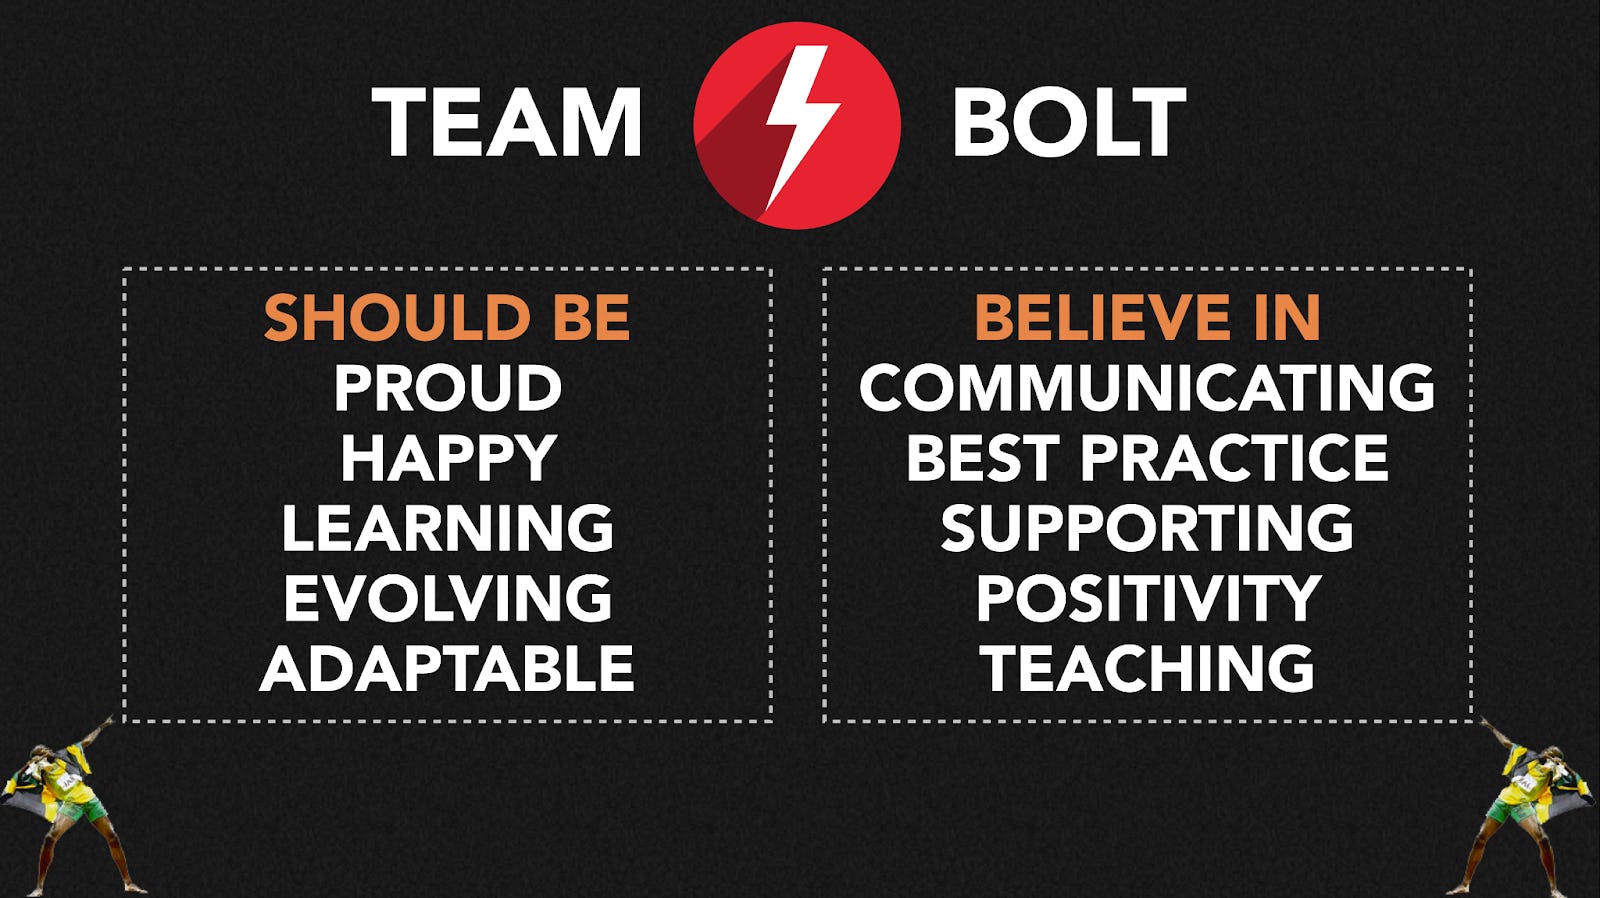 example of team charter for team bolt showing what to believe in and what the qualities of the team should be